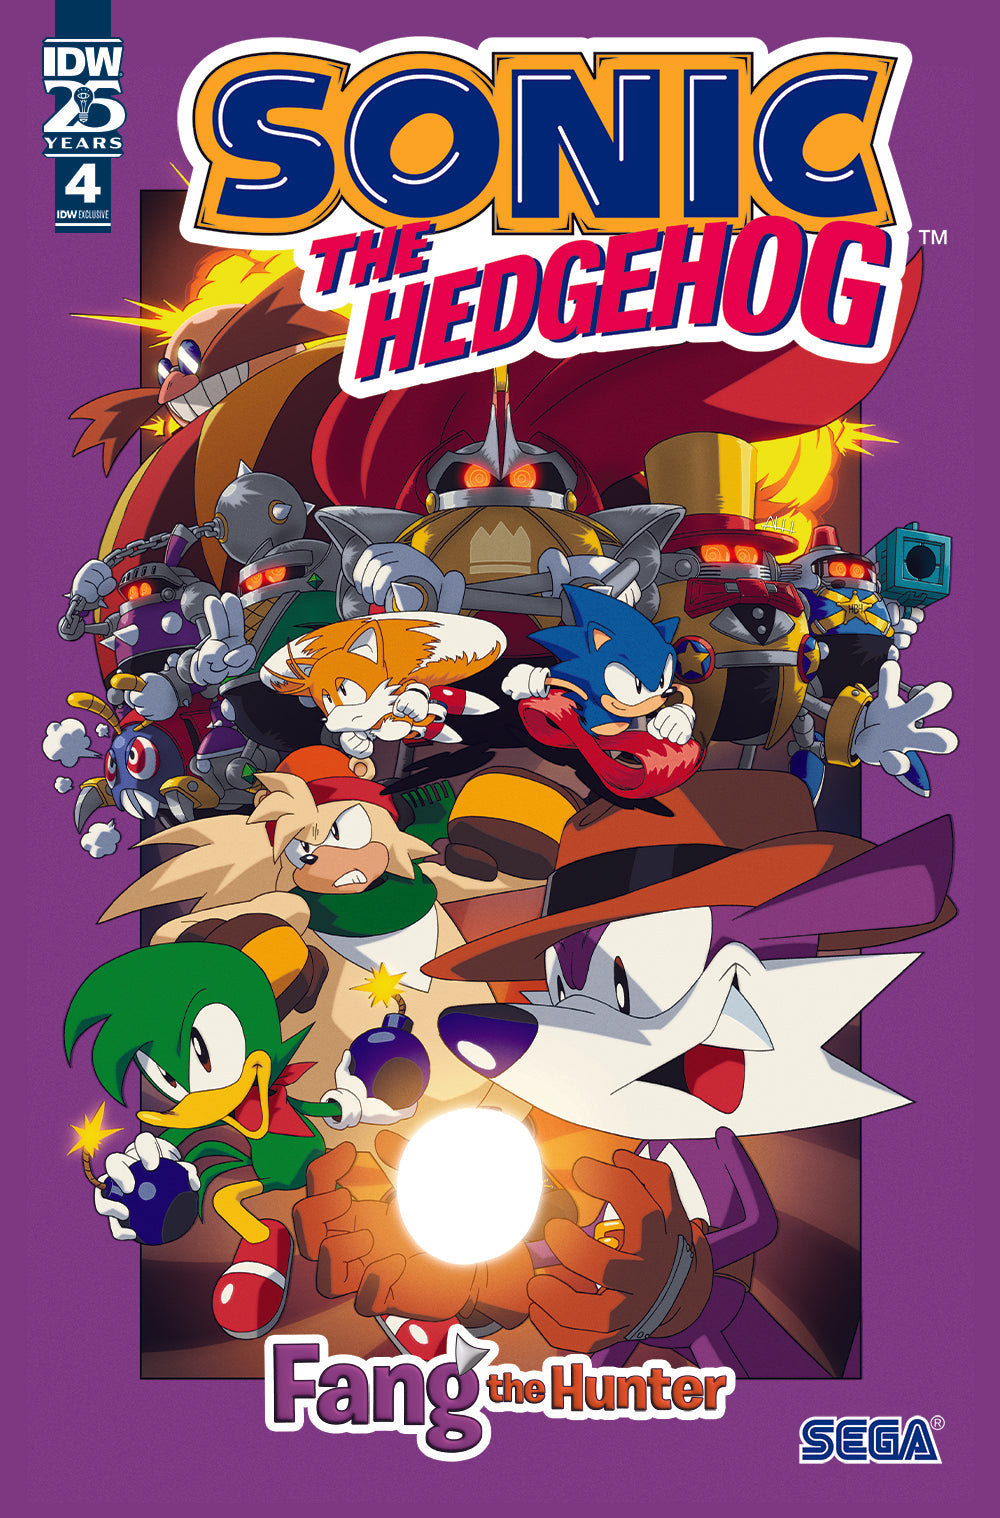 Sonic the Hedgehog: Fang the Hunter #4 - IDW Foil Exclusive